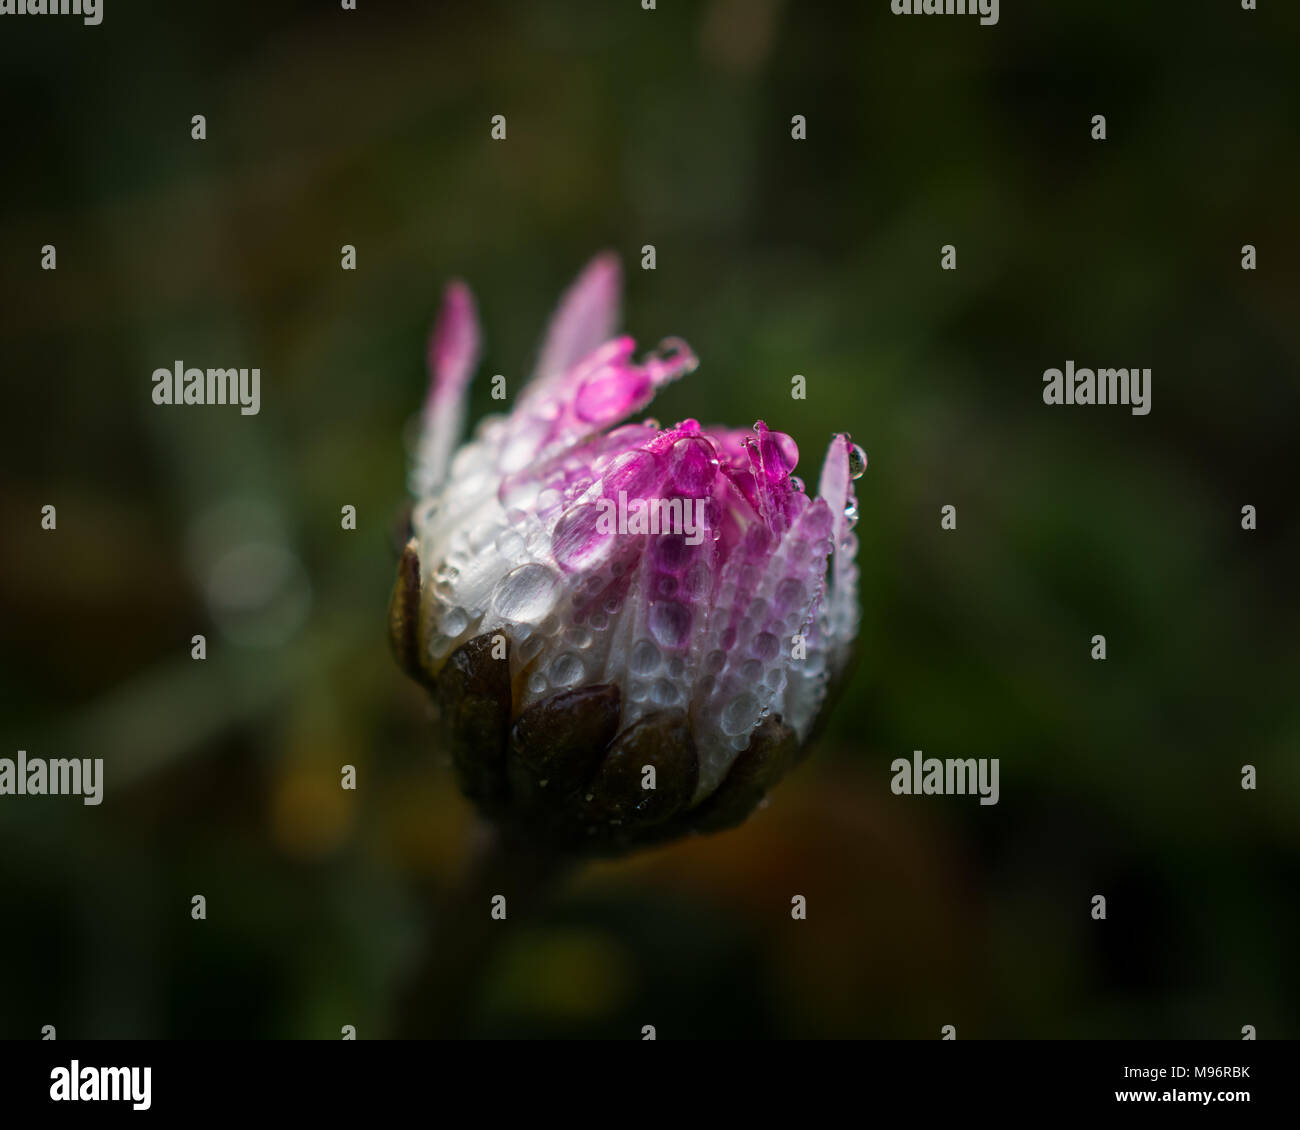 Daisy covered in water droplets. Stock Photo